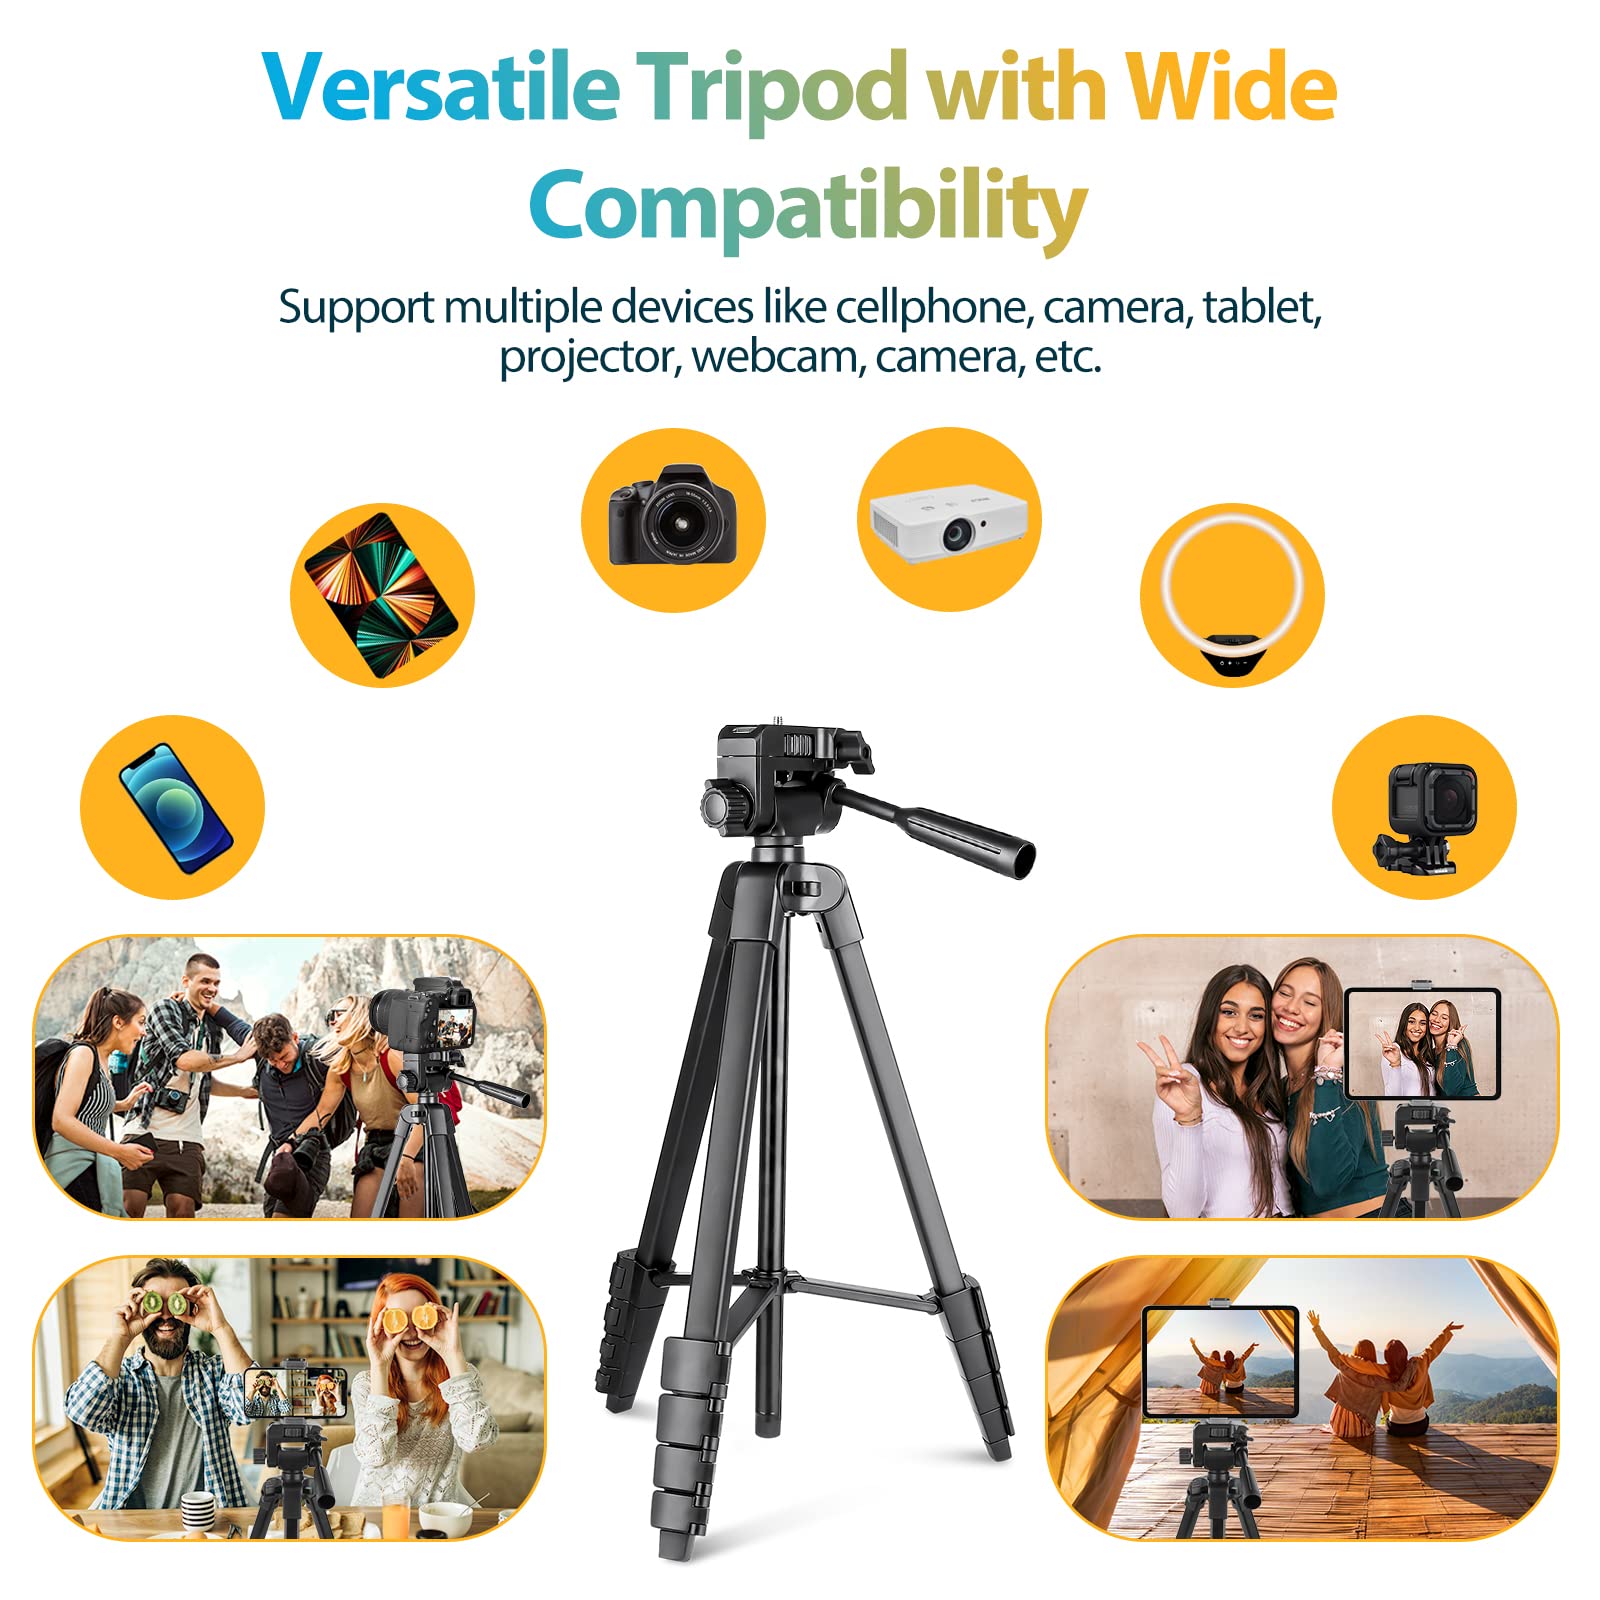 Aureday Phone Tripod Stand, 64” Extendable Cell Phone&Camera Tripod with Wireless Remote and Phone Holder, Aluminum iPad Tripod for Video Recording/Selfies/Live Stream/Vlogging